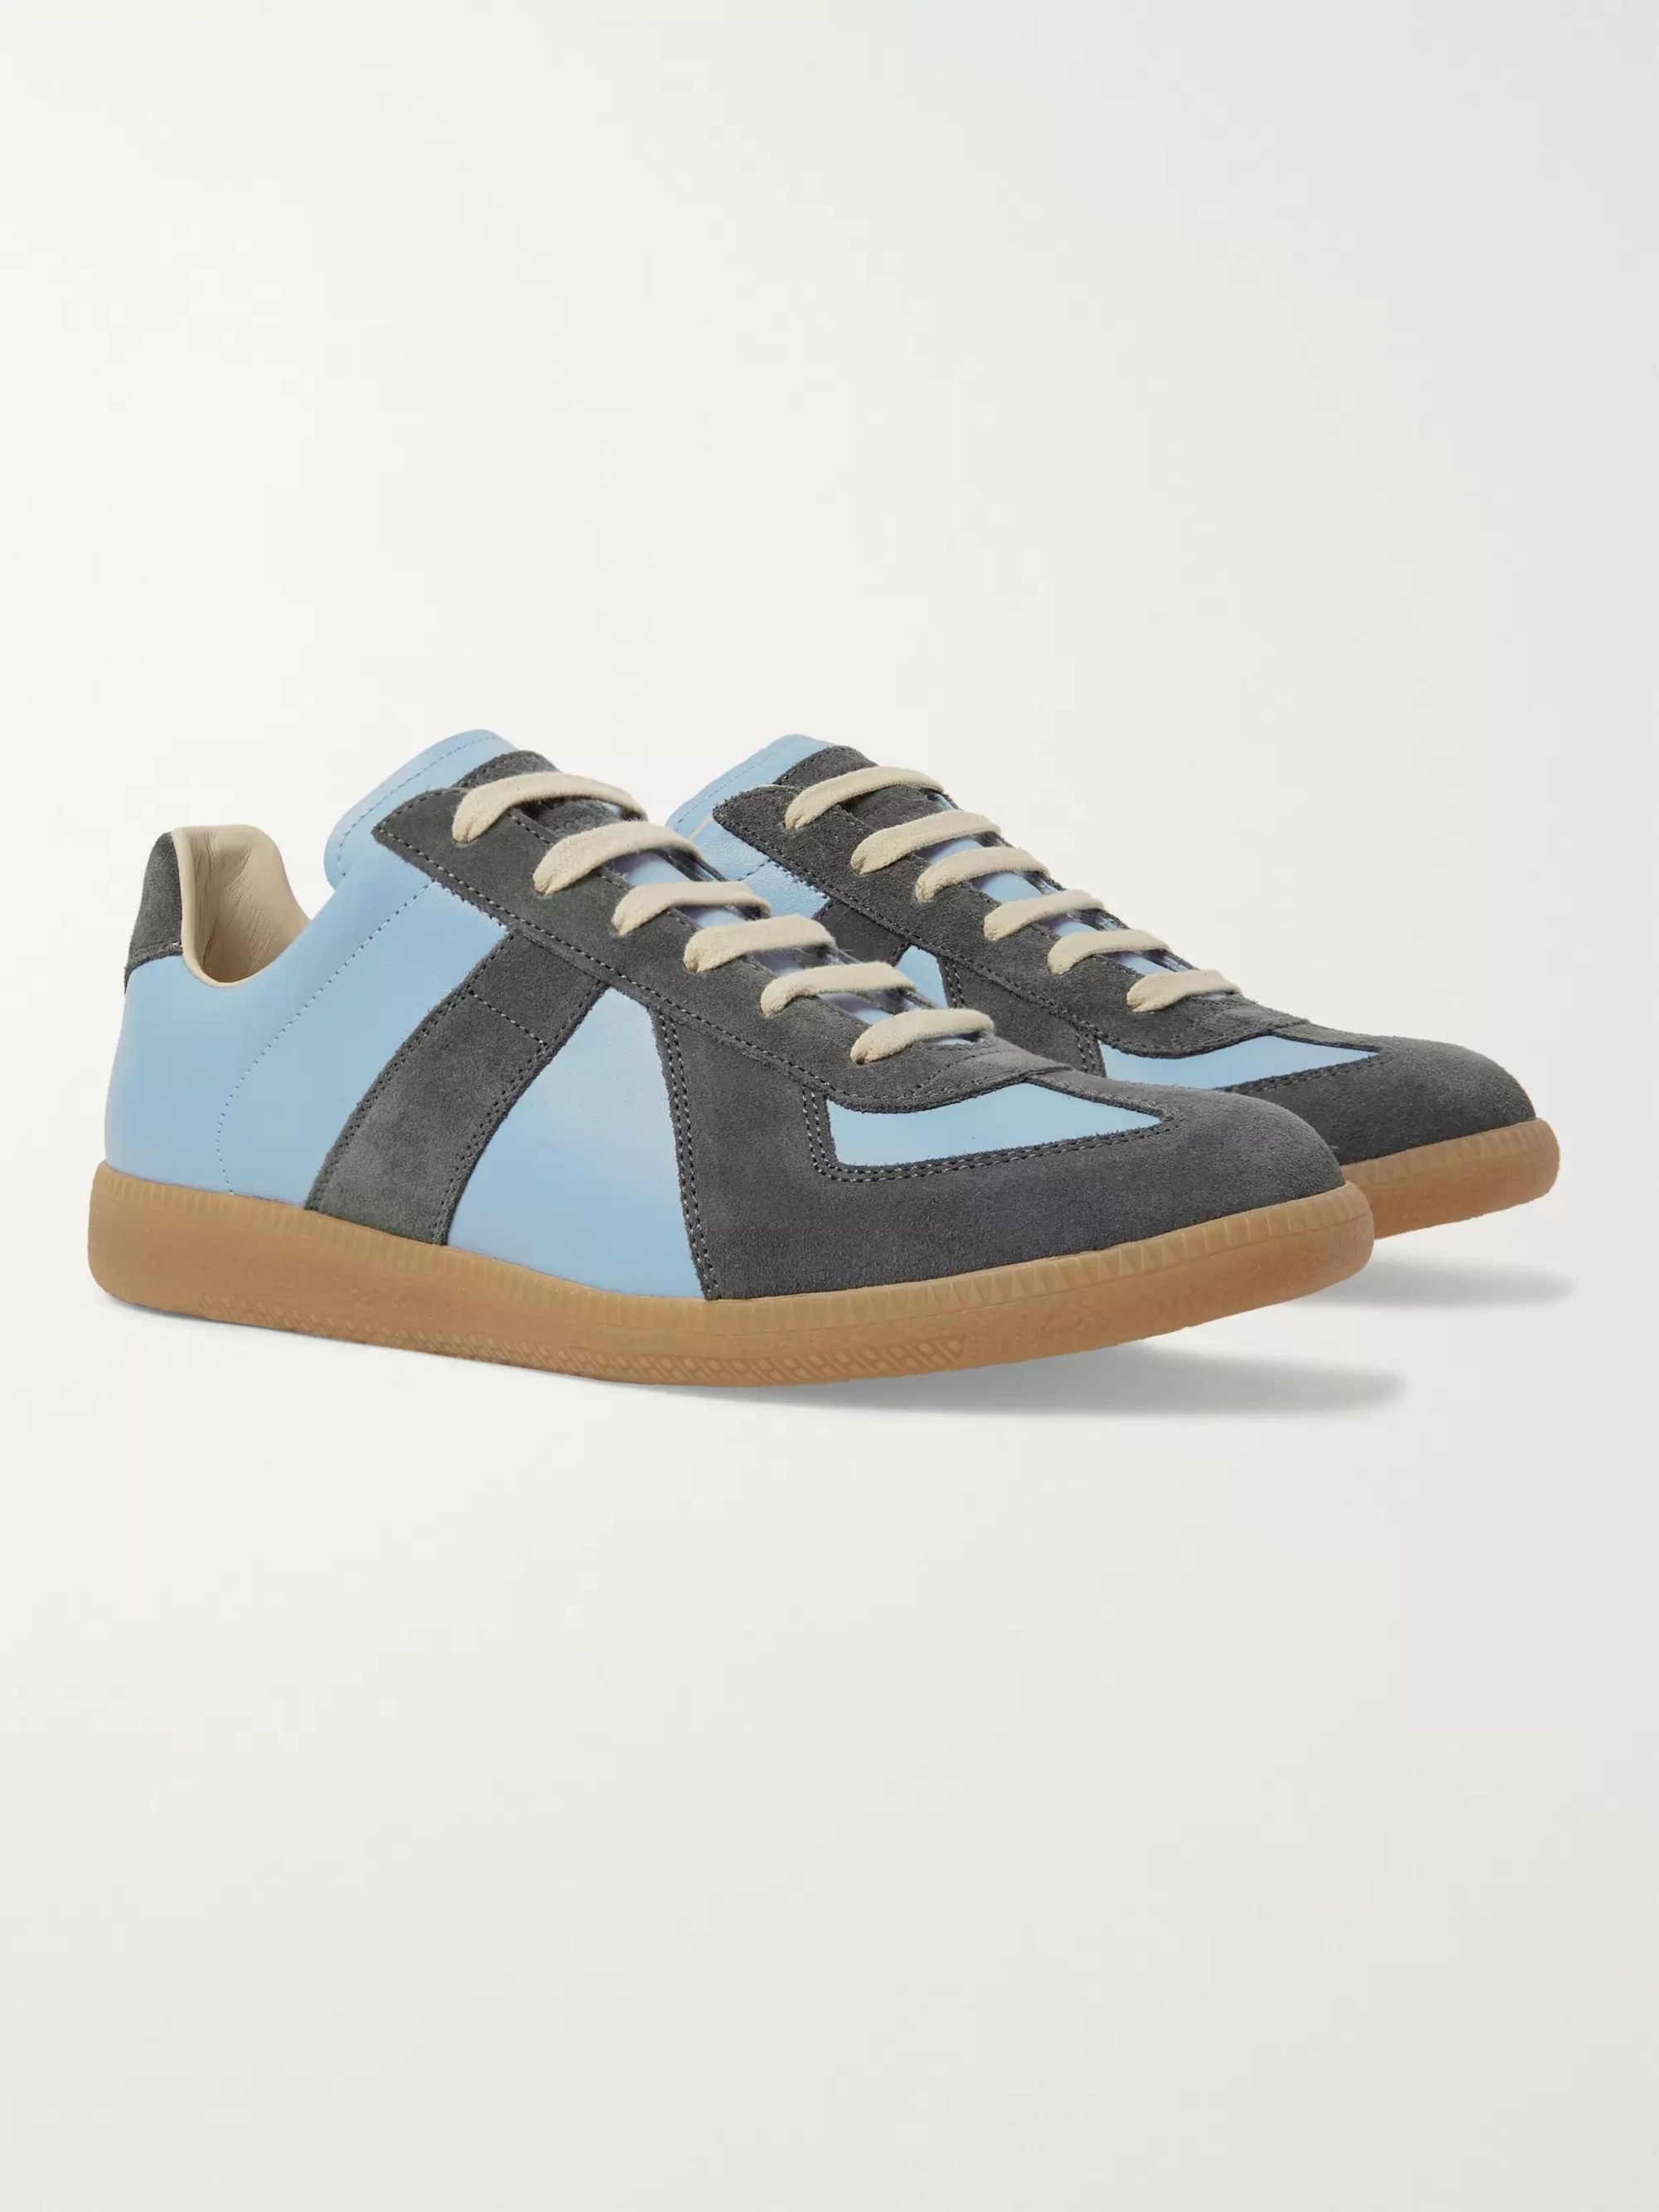 Light blue Replica Leather and Suede 